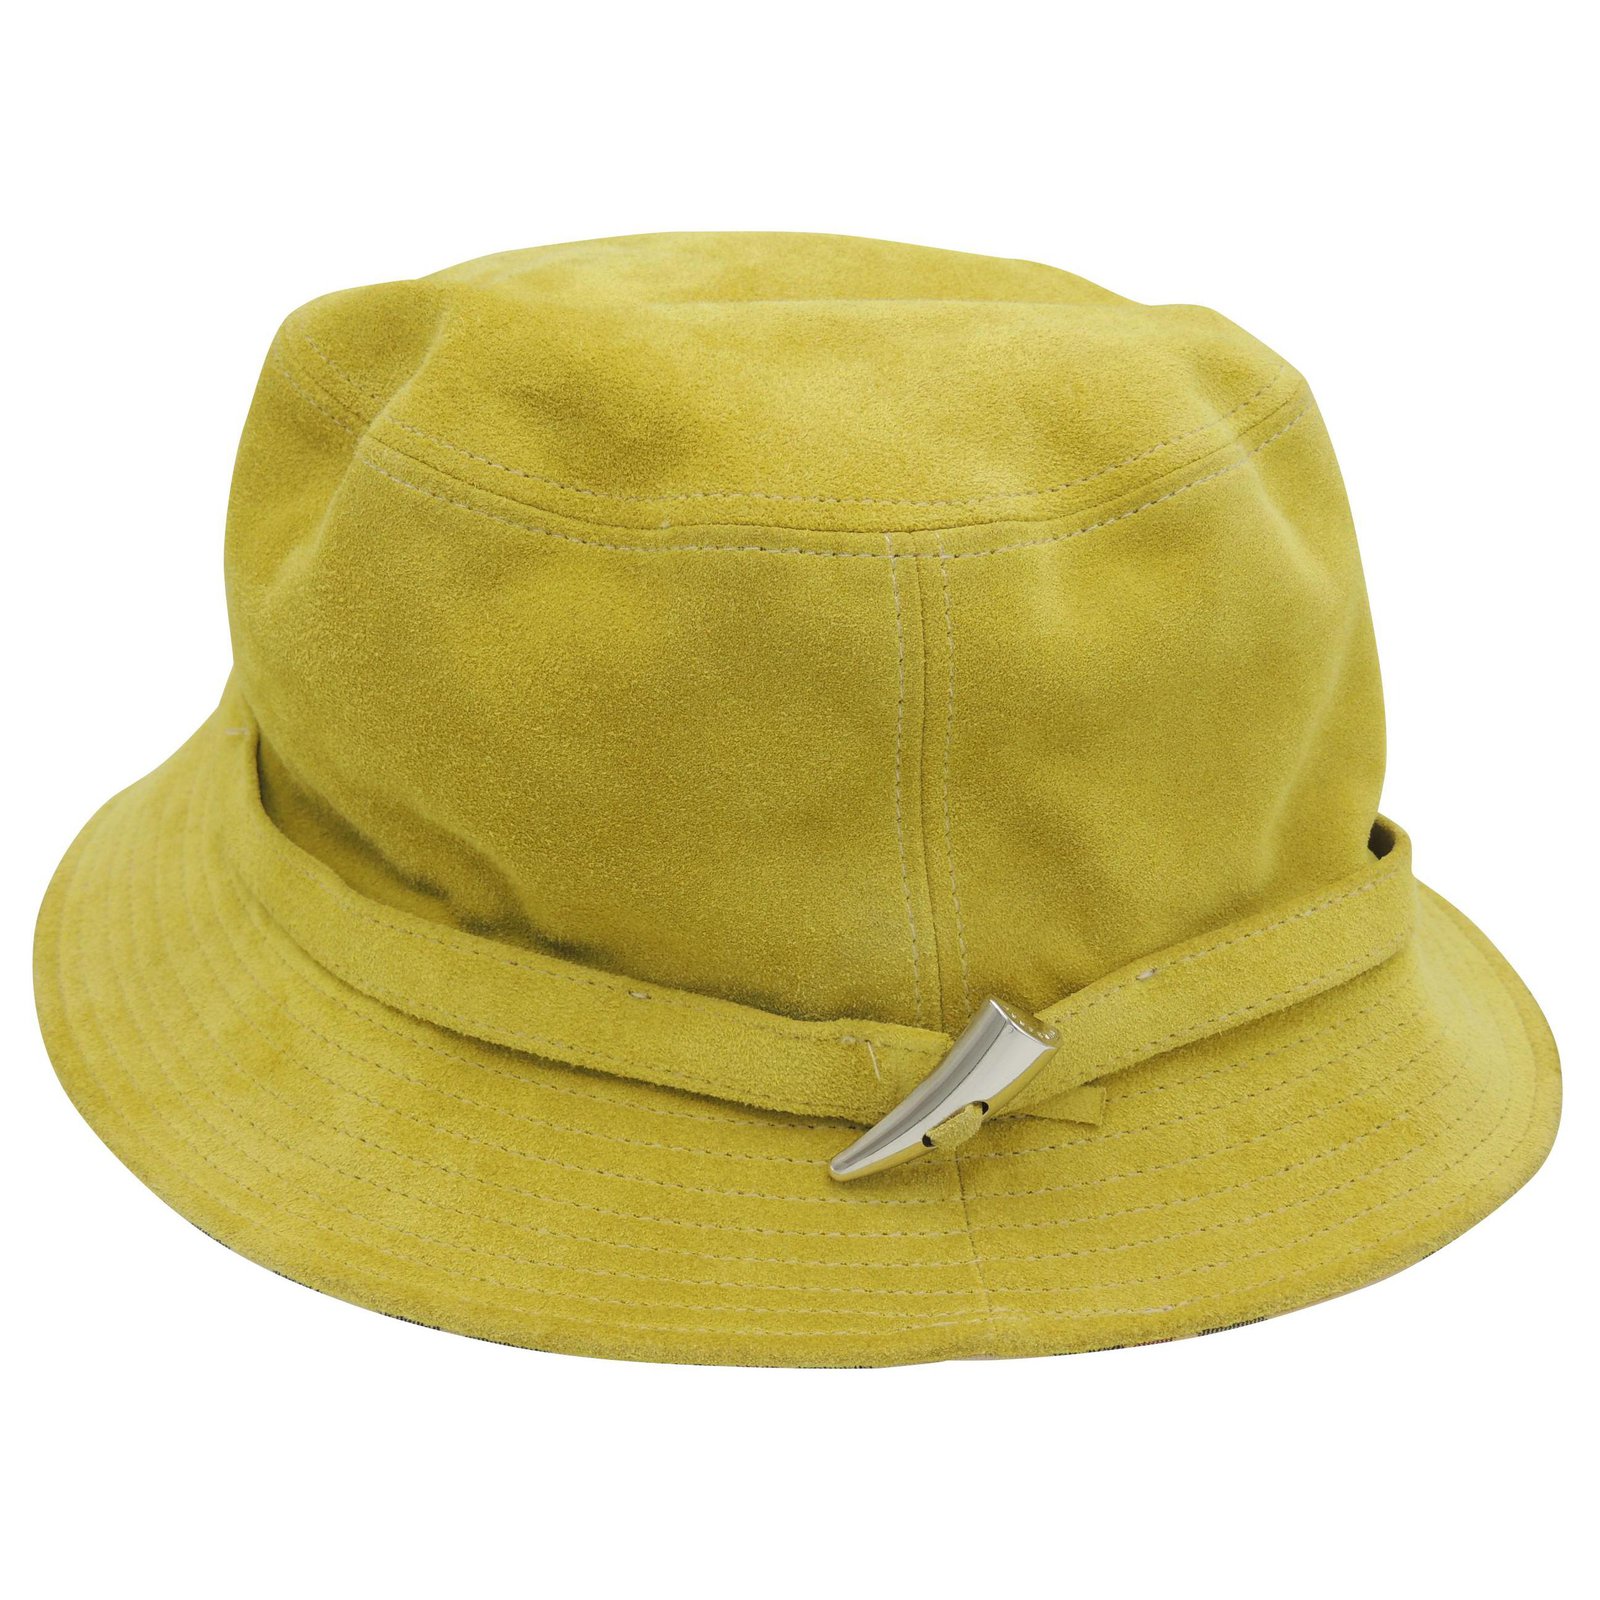 burberry hat size